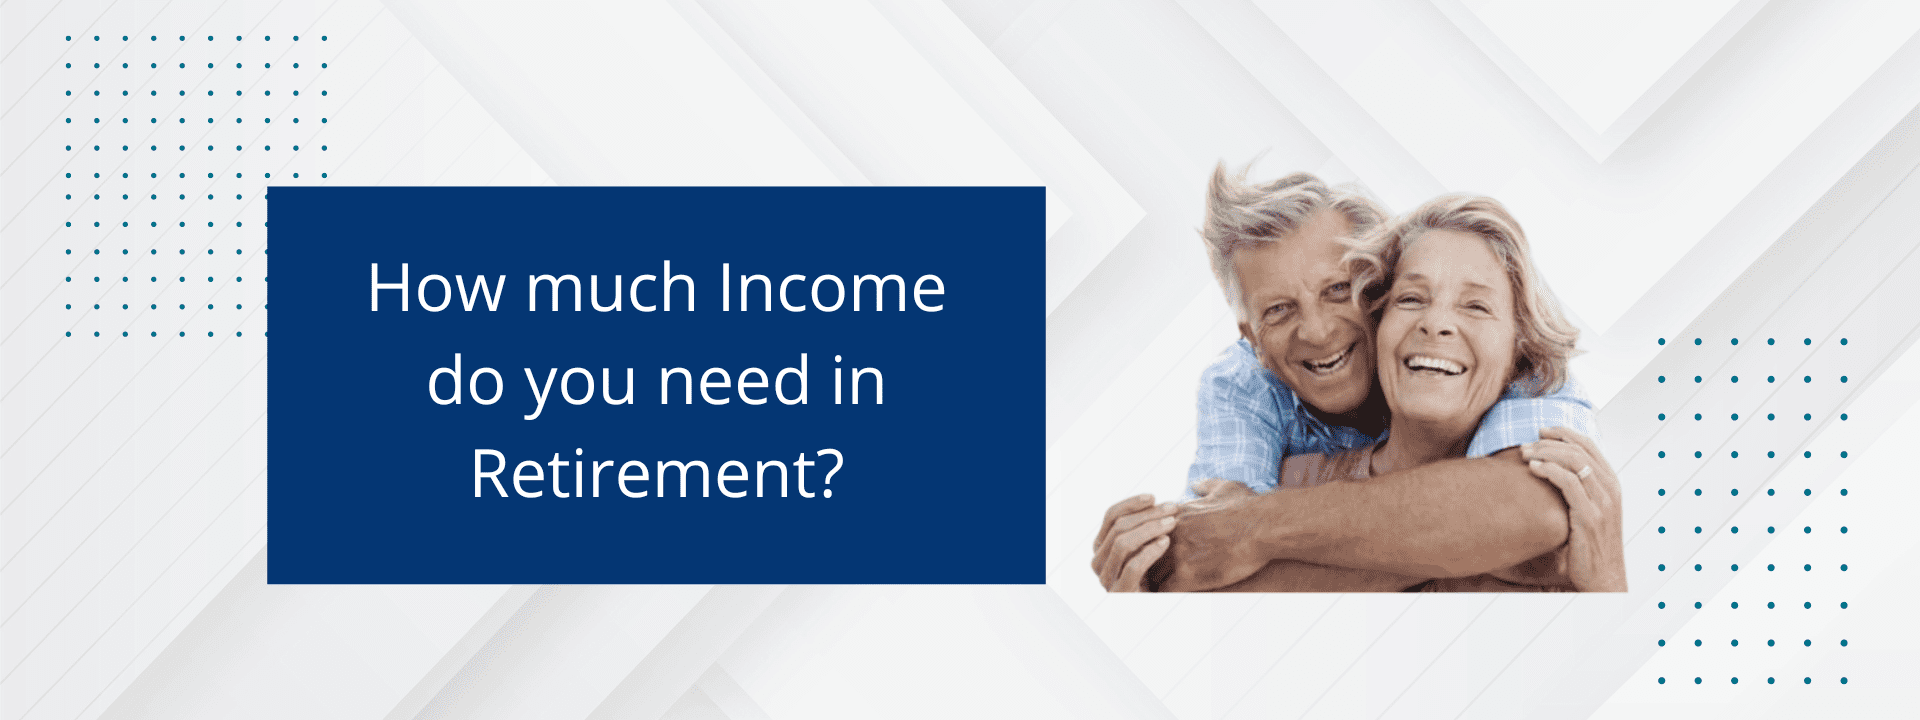 How much income do you need in retirement